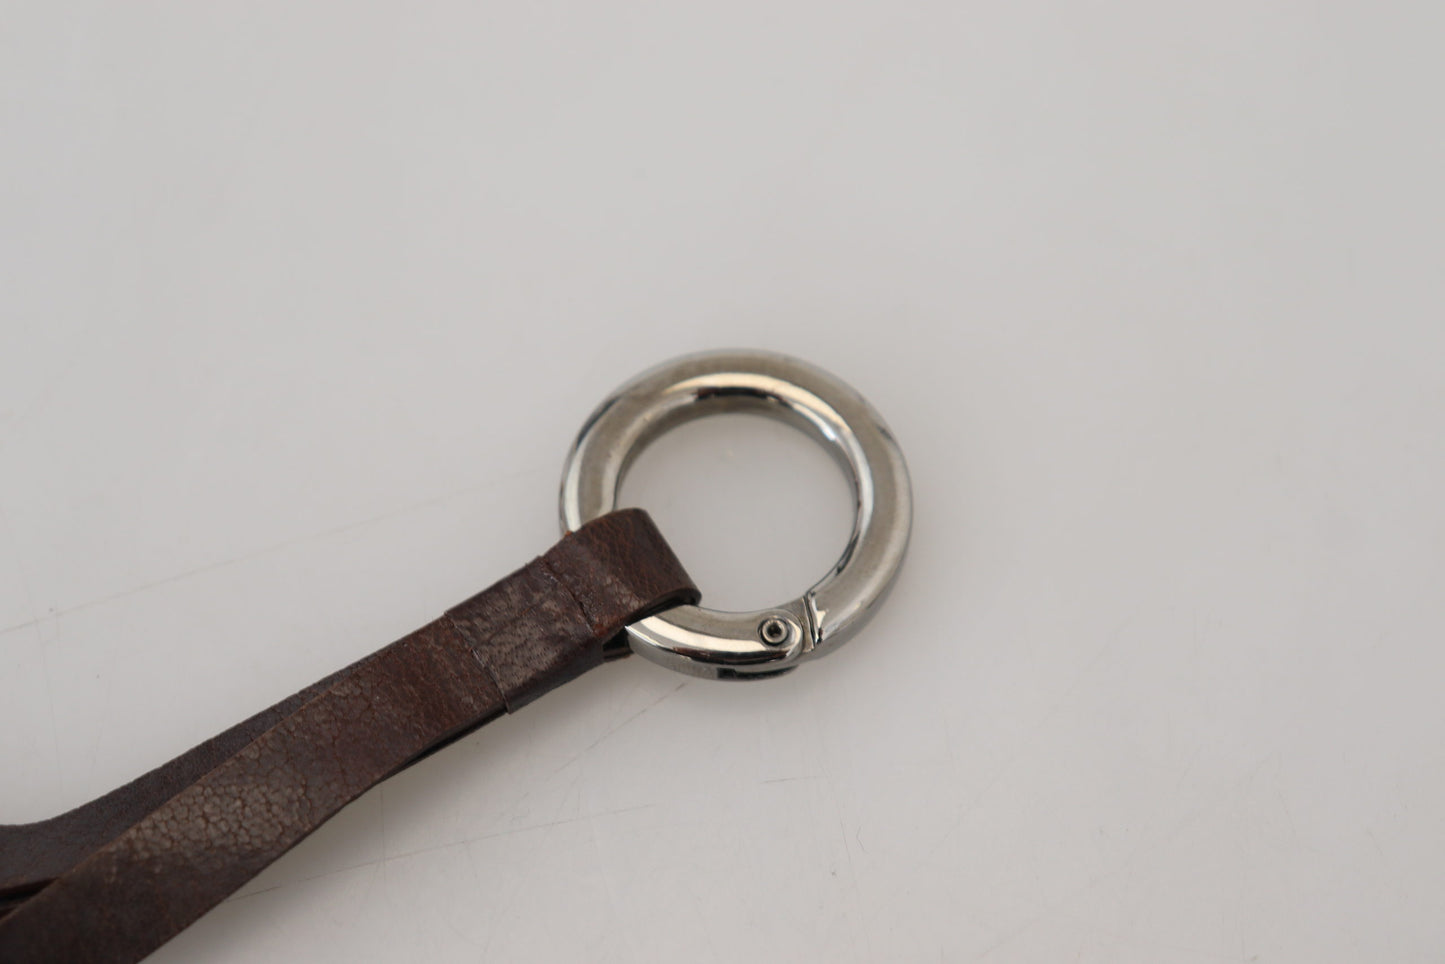 Costume National Brown Leather Silver Tone Metal Keyring Keychain - Designed by Costume National Available to Buy at a Discounted Price on Moon Behind The Hill Online Designer Discount Store